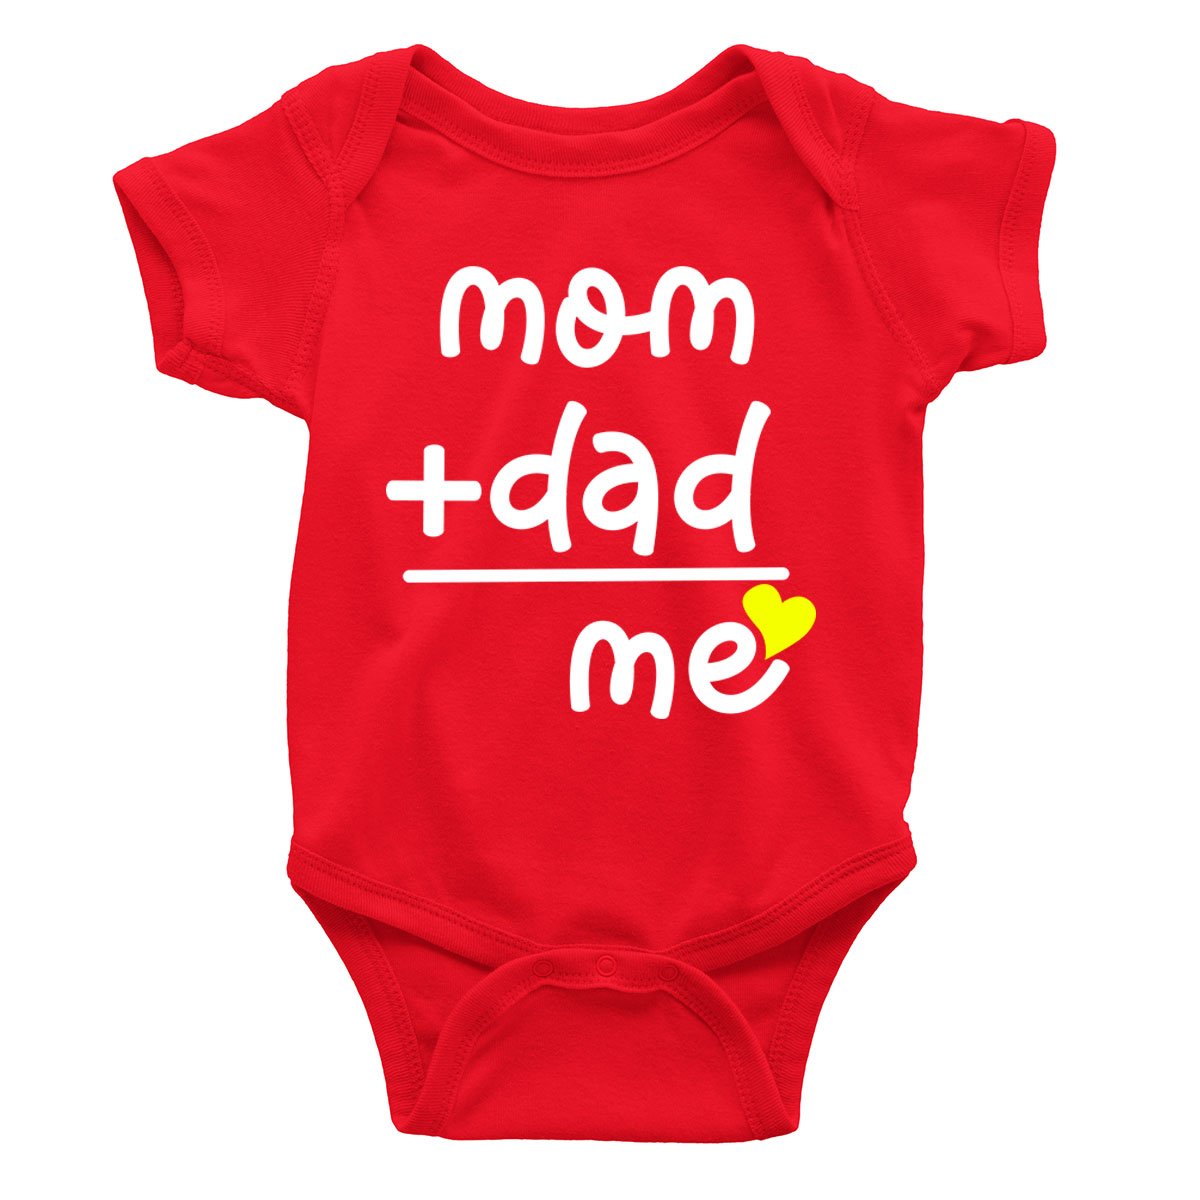 mom+dad-me red